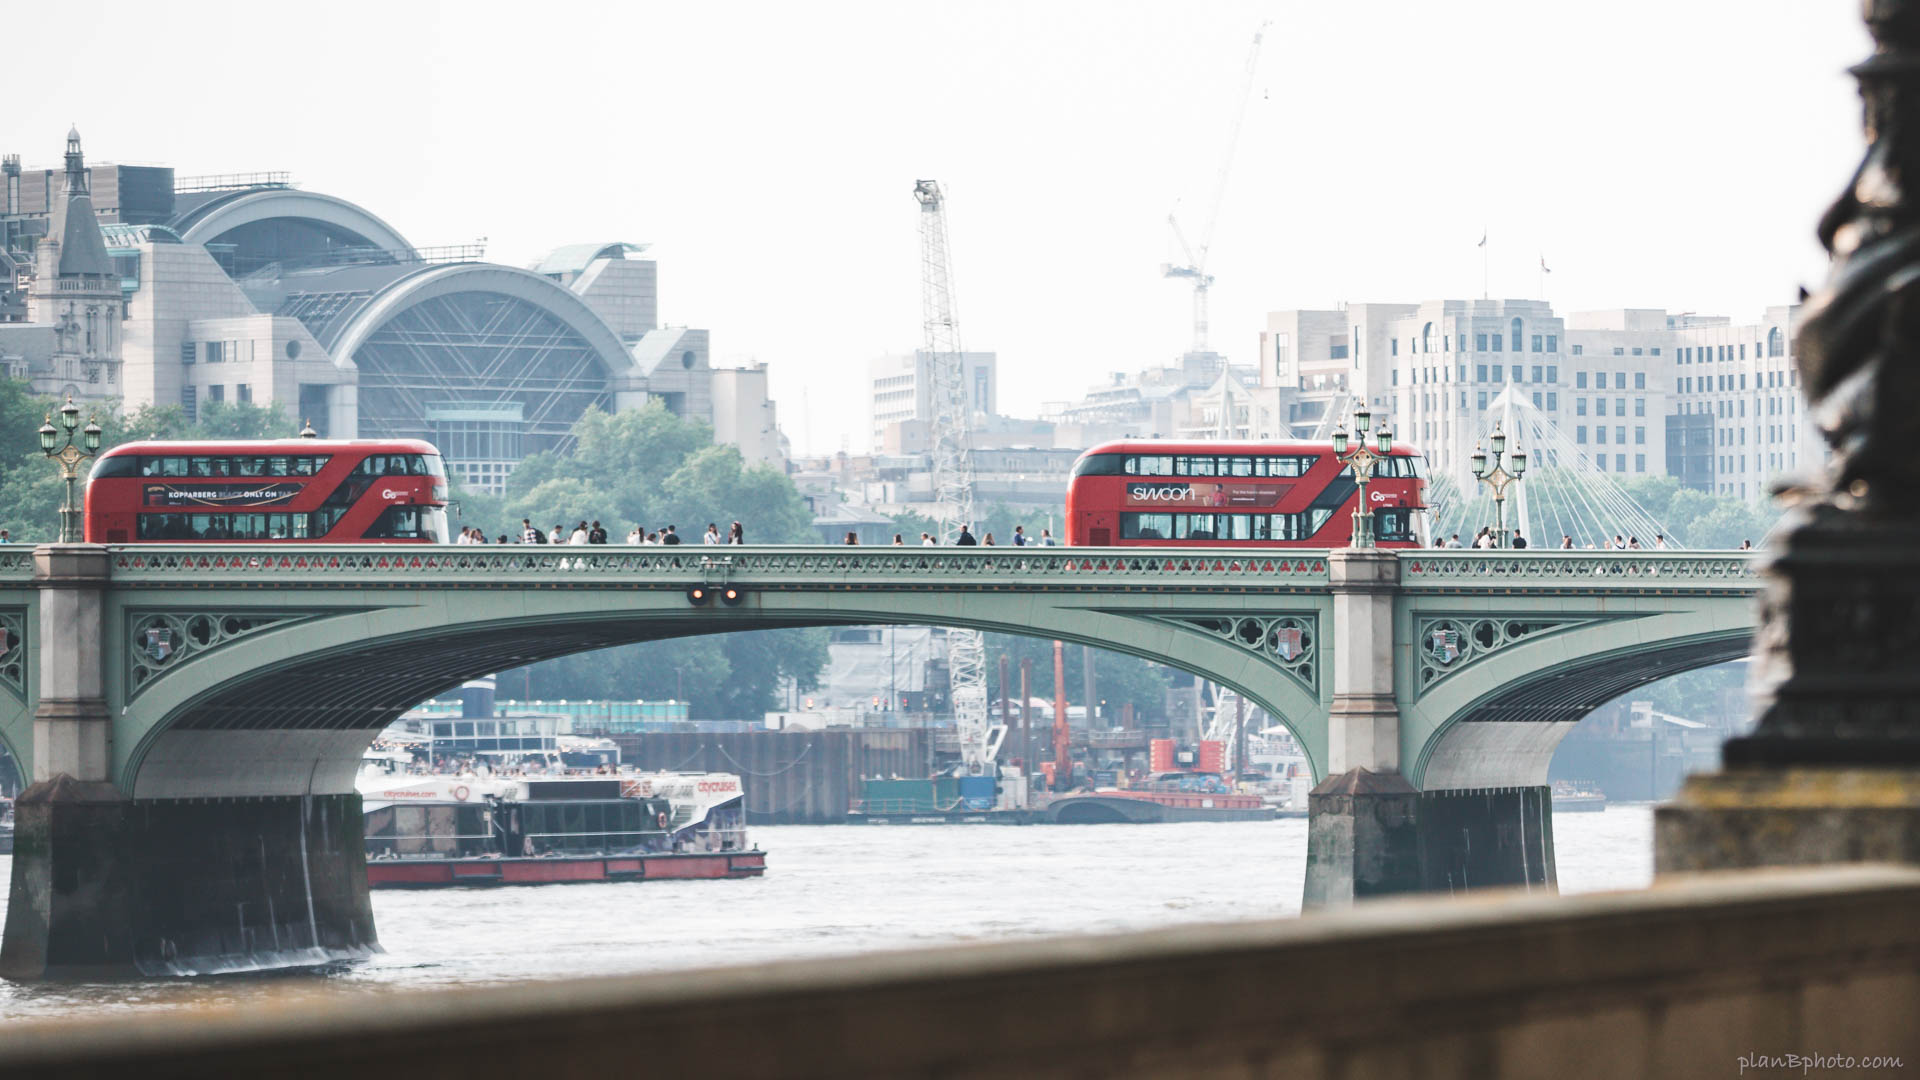 Bridge in London with two double-deckers